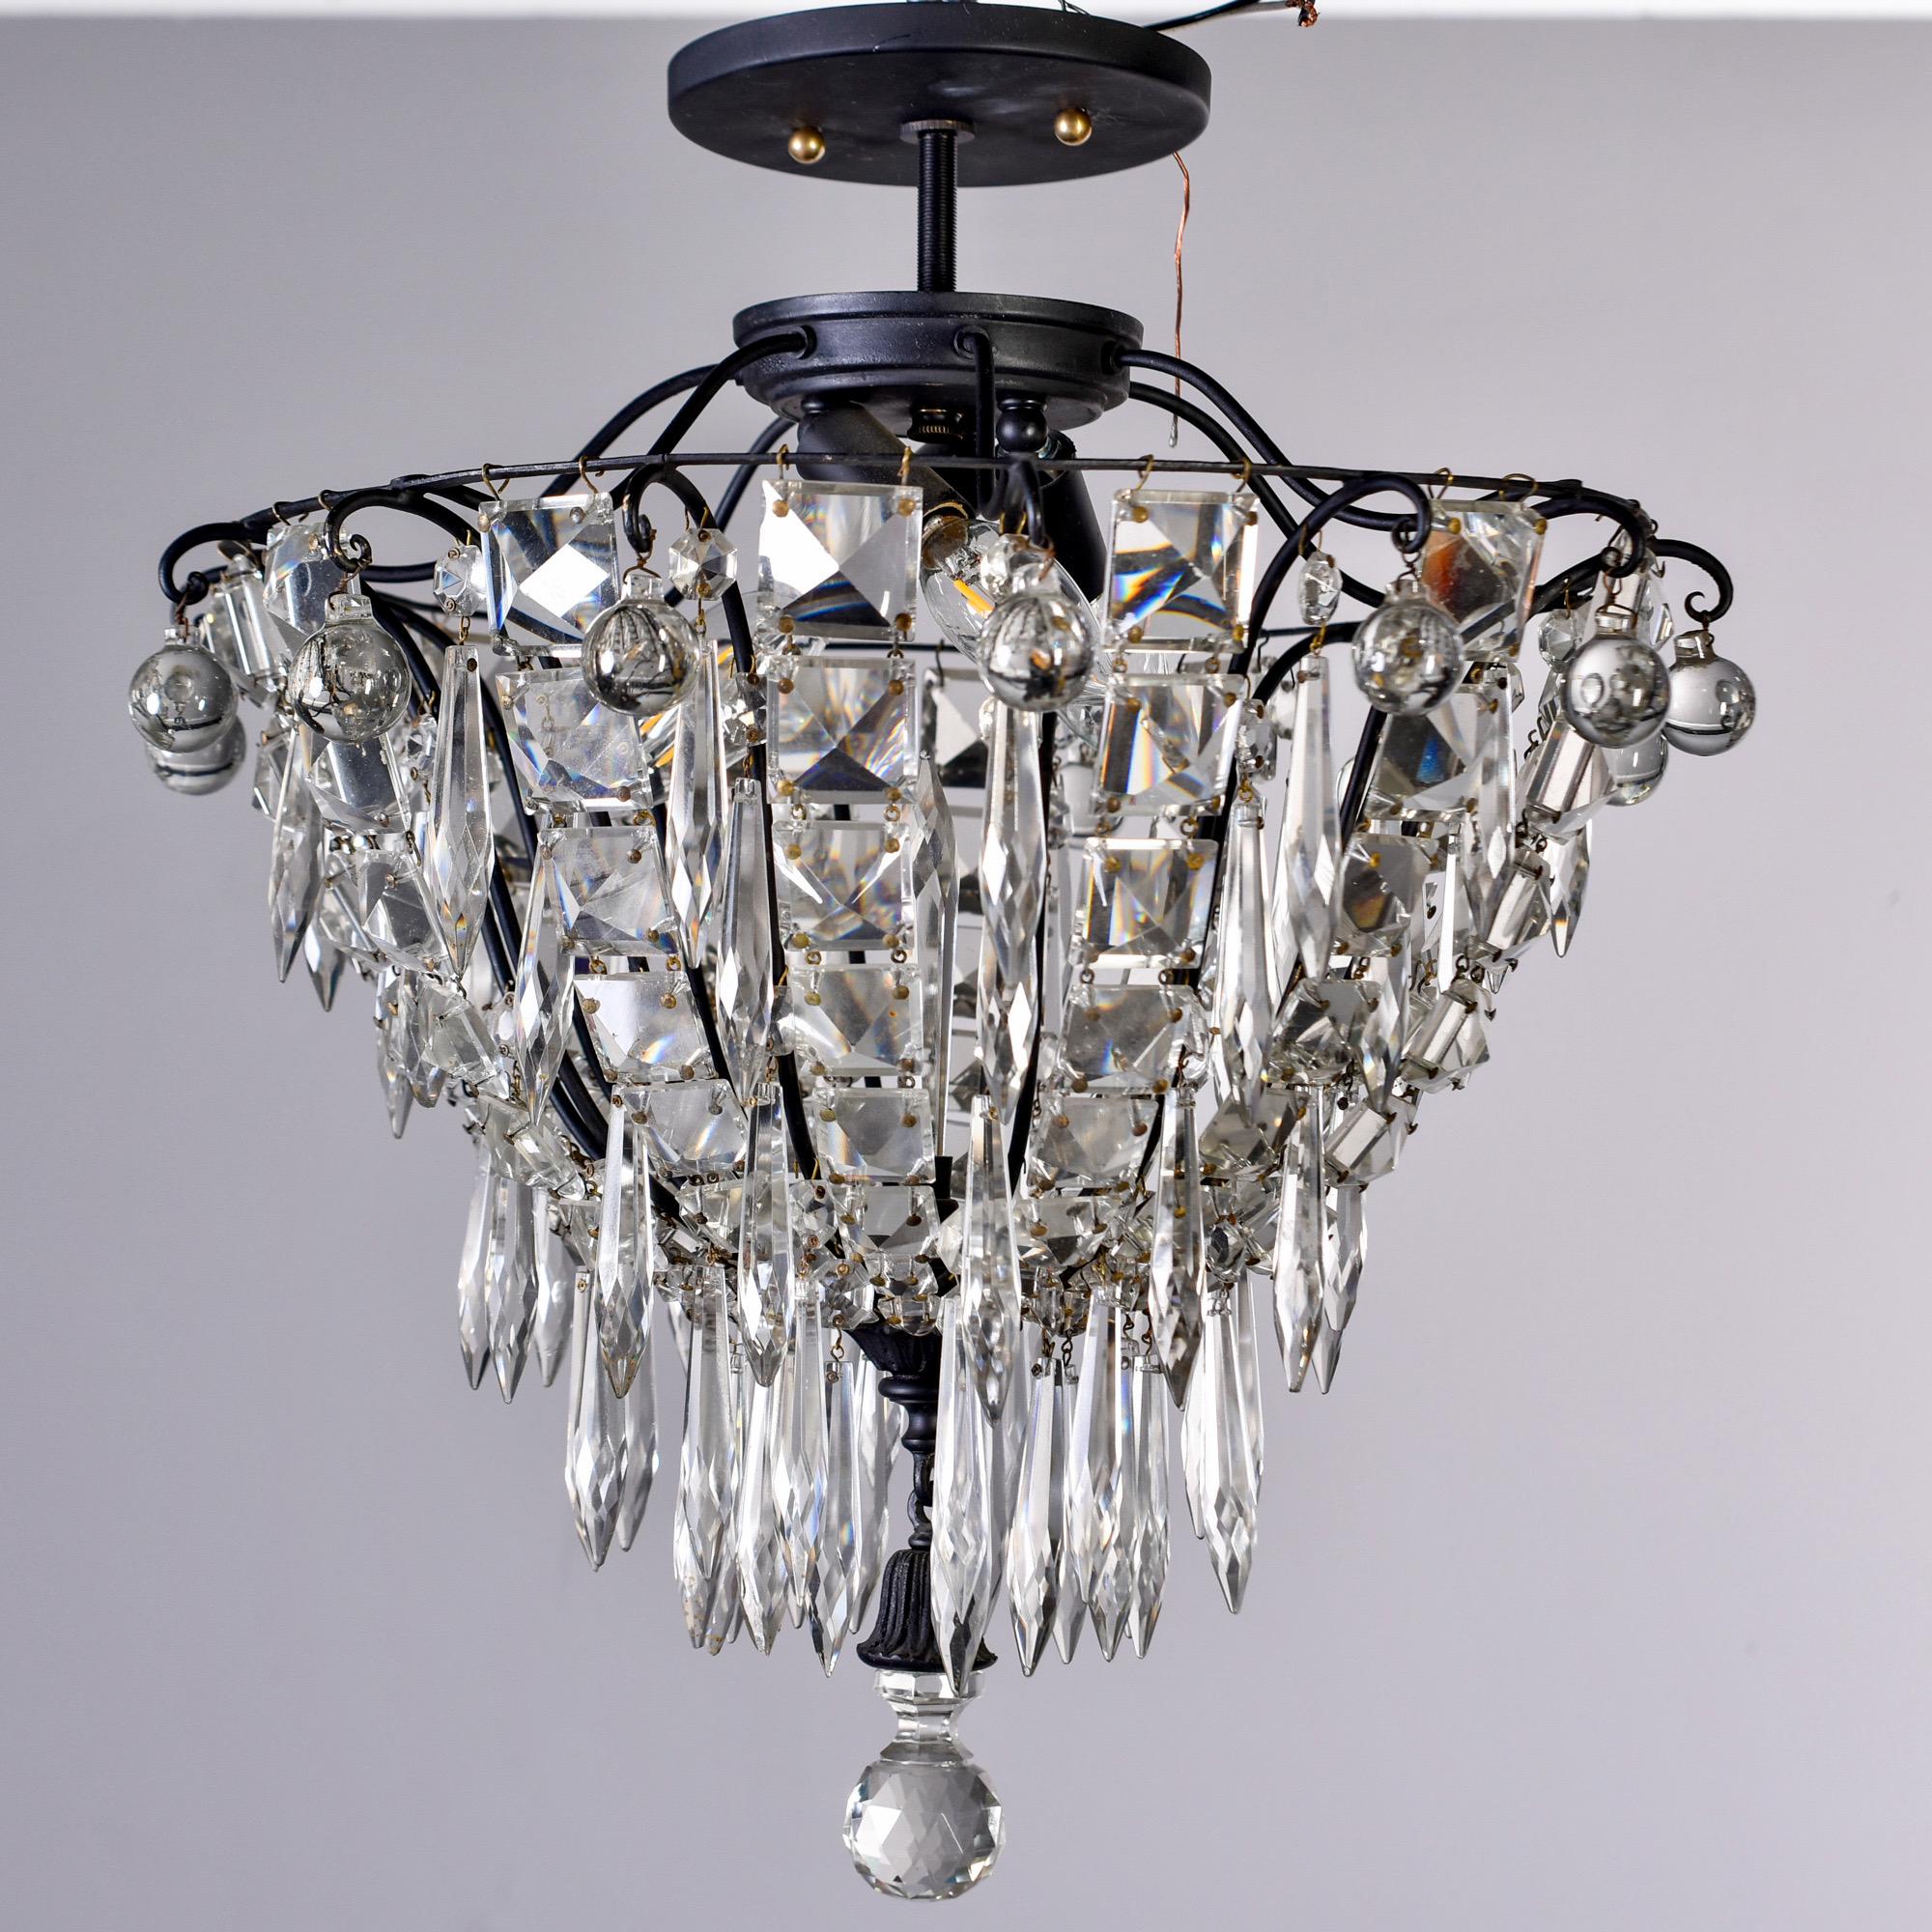 Semi-flushmount fixture features a black metal basket-form frame has a top row of clear crystal spears and draped with square, faceted crystals and crystal spears with a faceted crystal finial, circa 1950s. Three internal candelabra sized sockets.